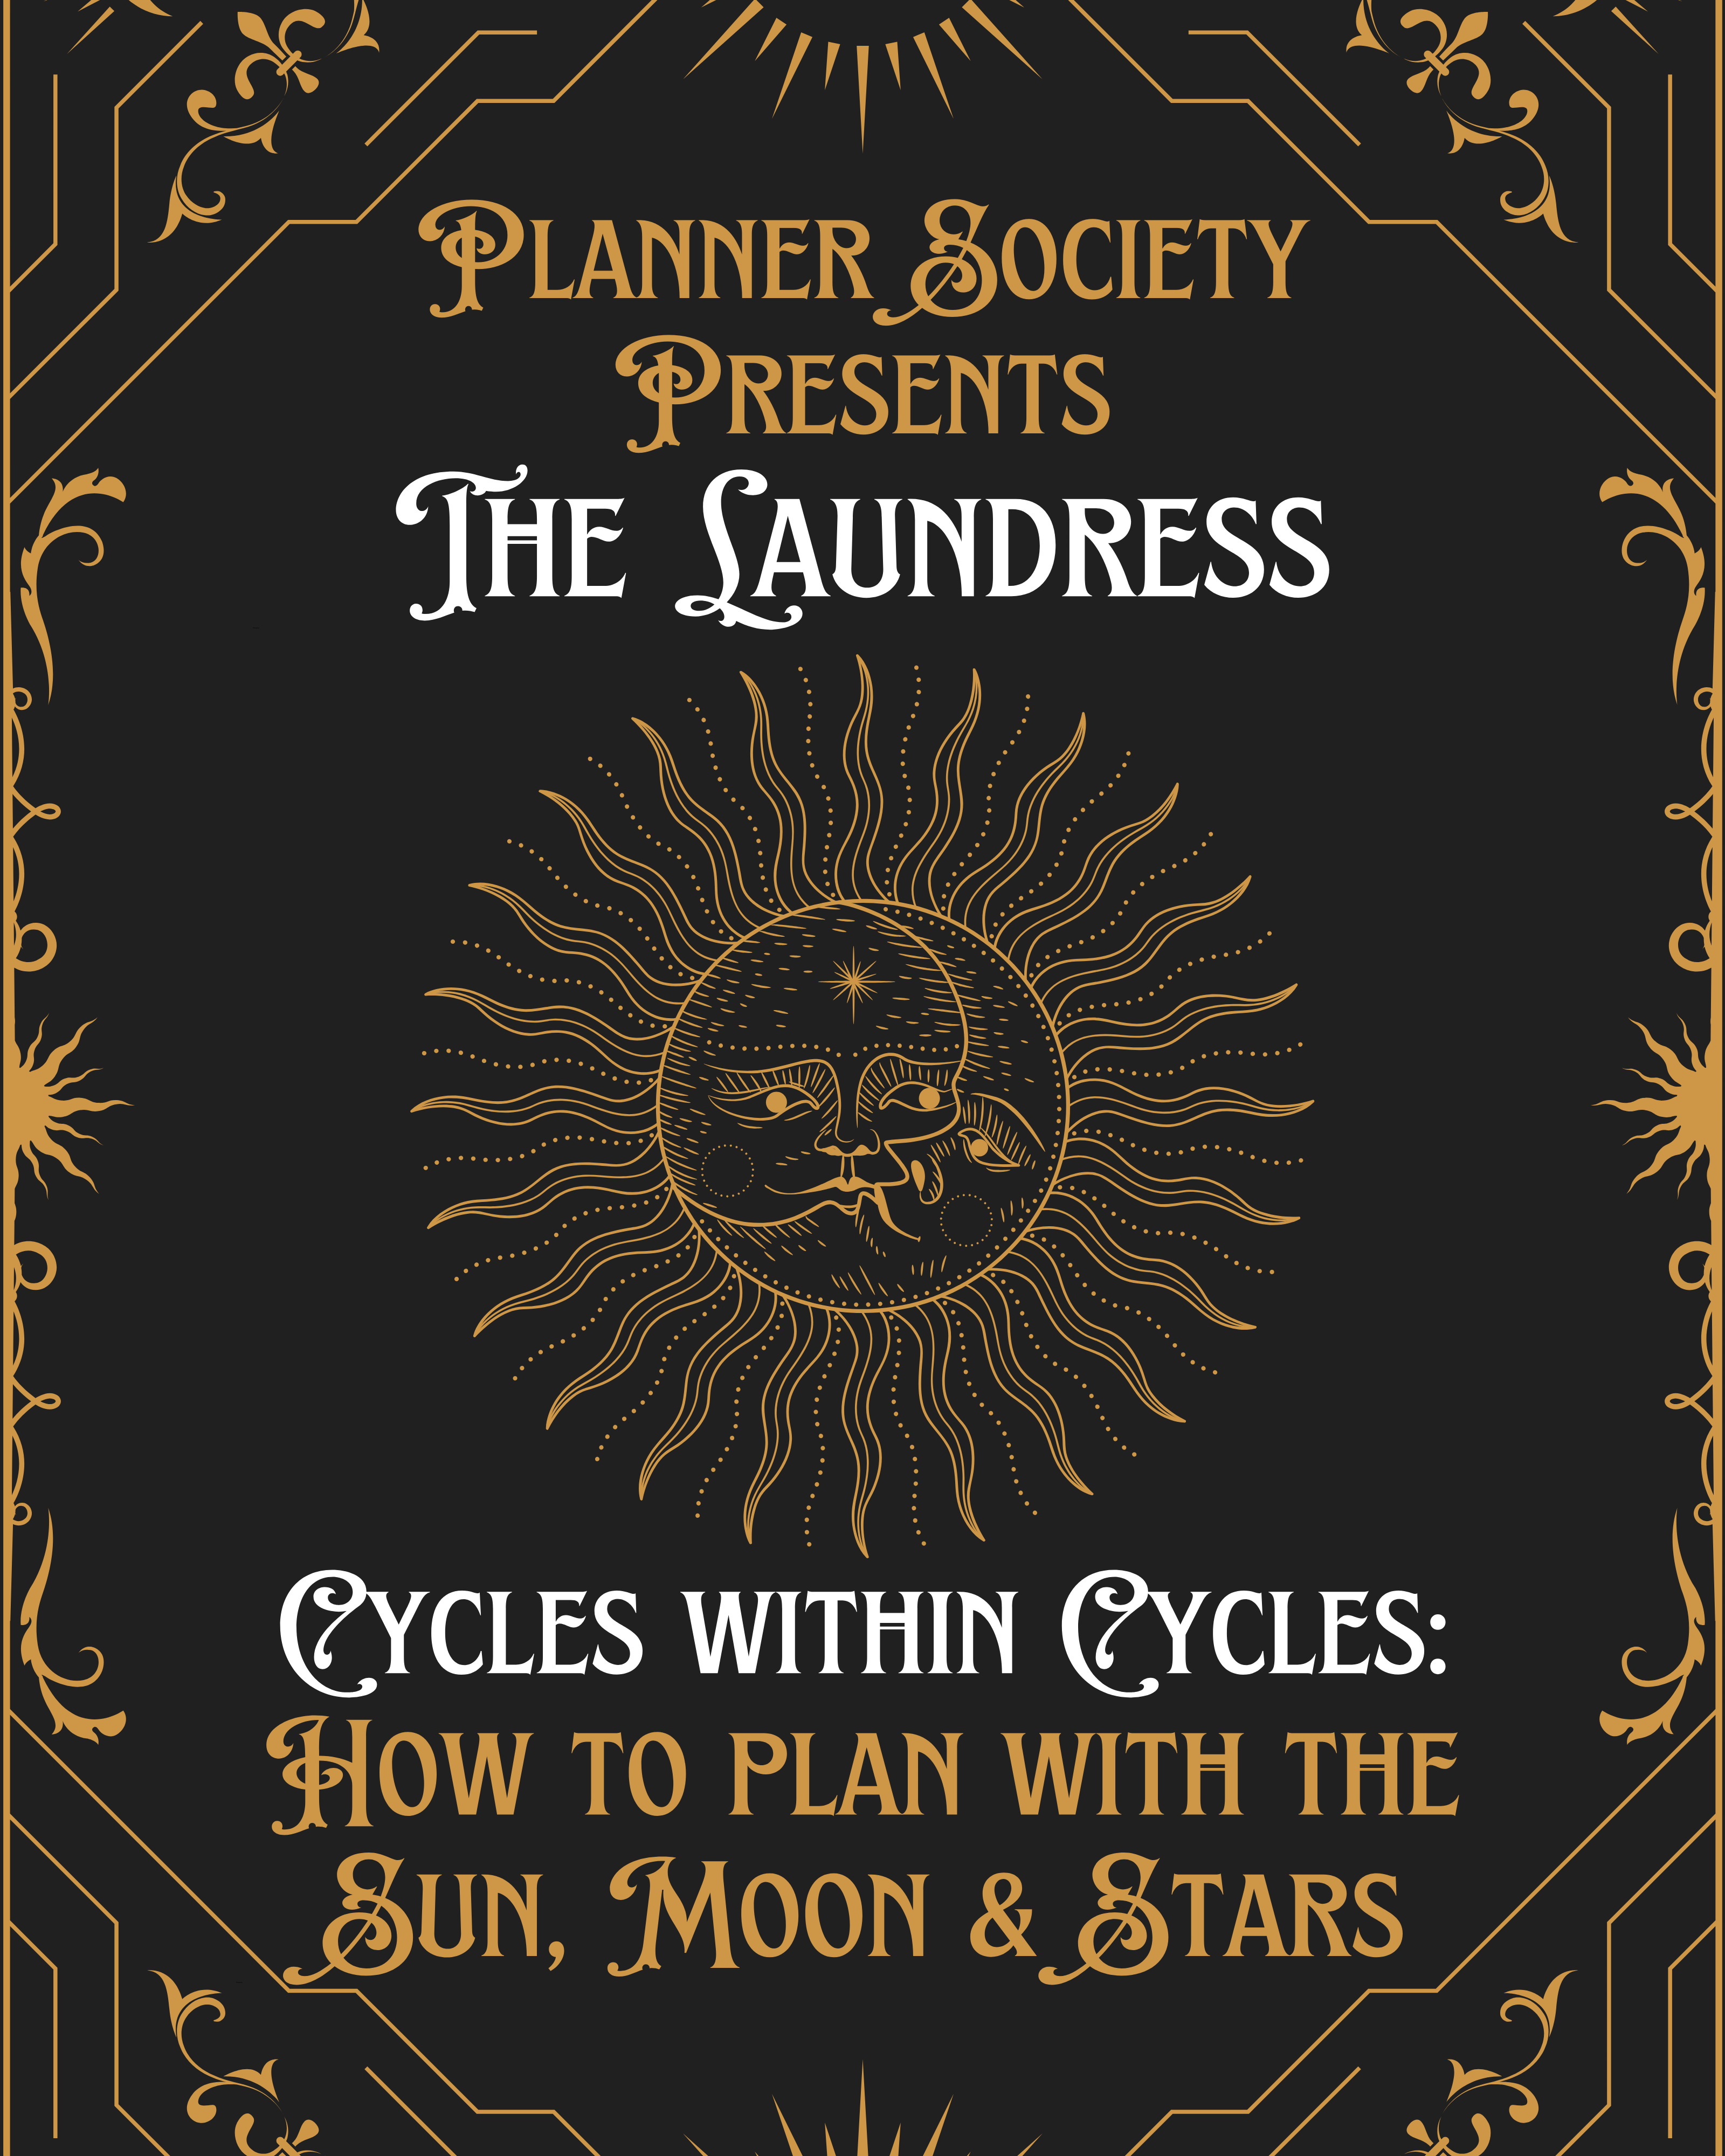 Planner Society Presents The Laundress Cycles Within Cycles: How to Plan with the Sun, Moon & Stars , sun on tarot card